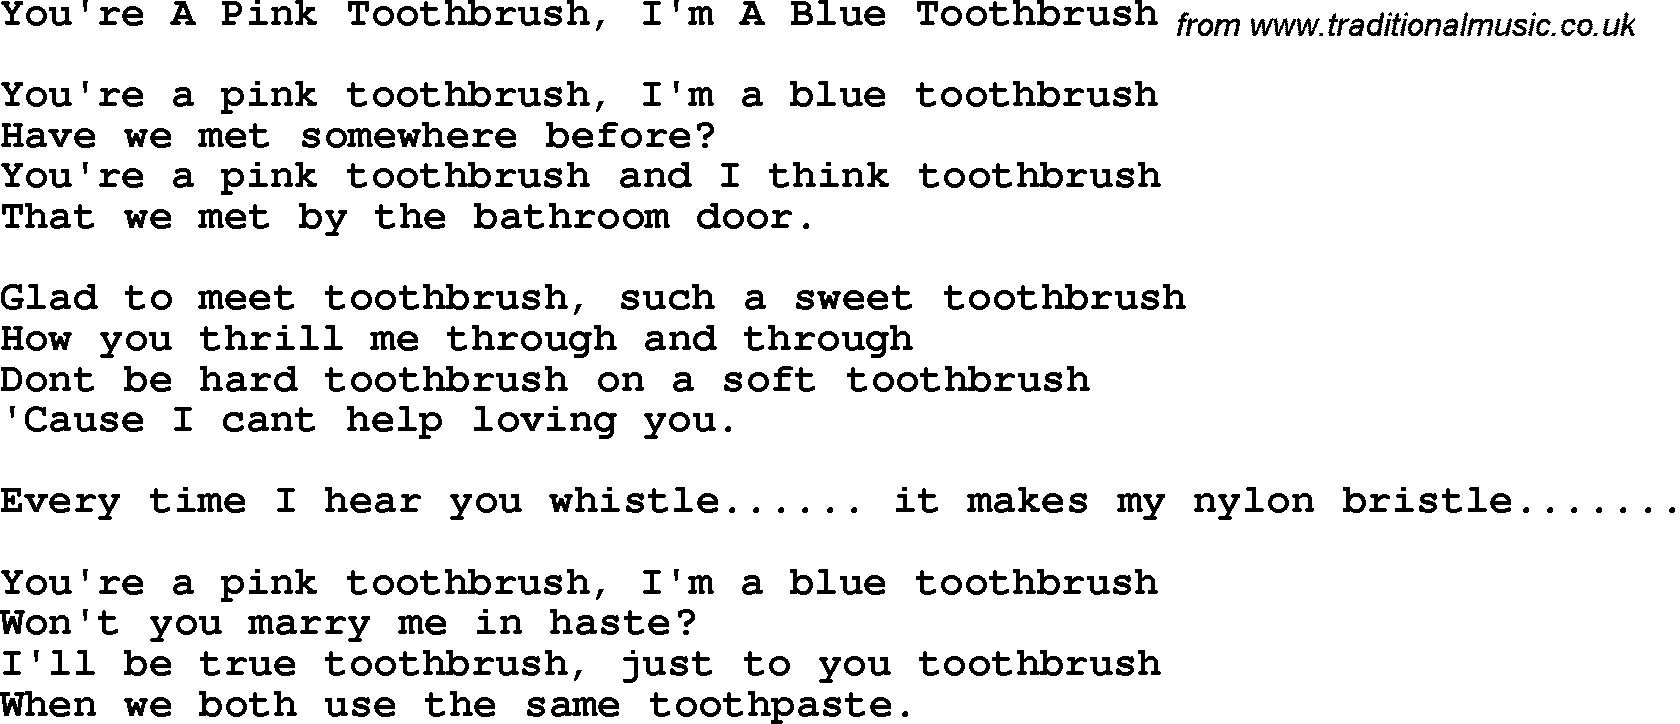 Novelty song: You're A Pink Toothbrush, I'm A Blue Toothbrush lyrics